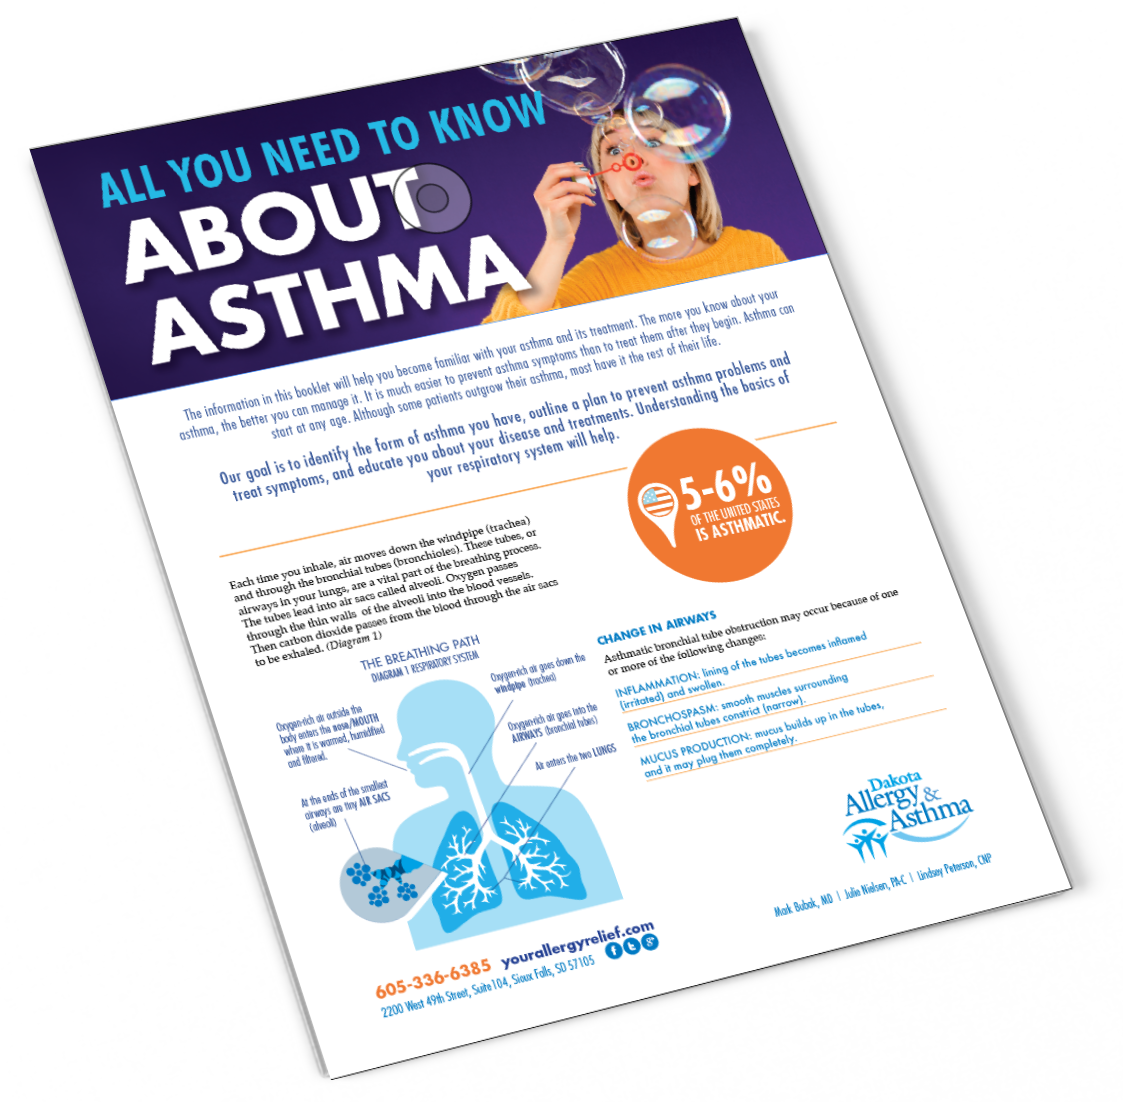 All-You-Need-To-Know-About-Asthma-COVER-1